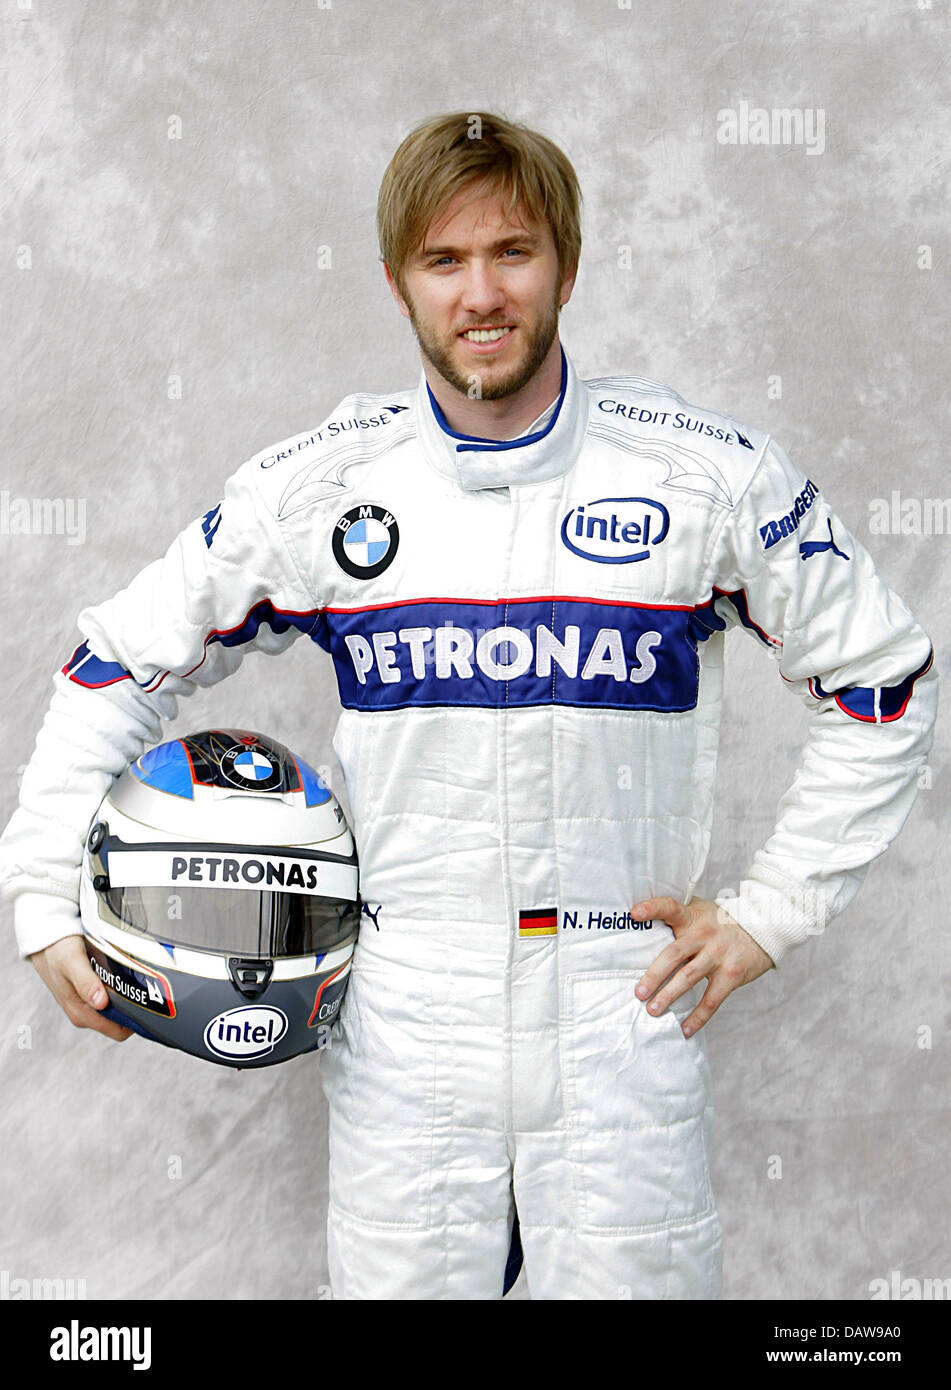 German Formula One pilot Nick Heidfeld of BMW Sauber F1 poses for the photographers during the official photo session to the Australian Grand Prix at the Albert Park race track in Melbourne, Australia, Thursday 15 March 2007. The first Grand Prix of the 2007 Formula 1 season will take place in Melbourne on Sunday 18 March. Photo: BERND THISSEN Stock Photo